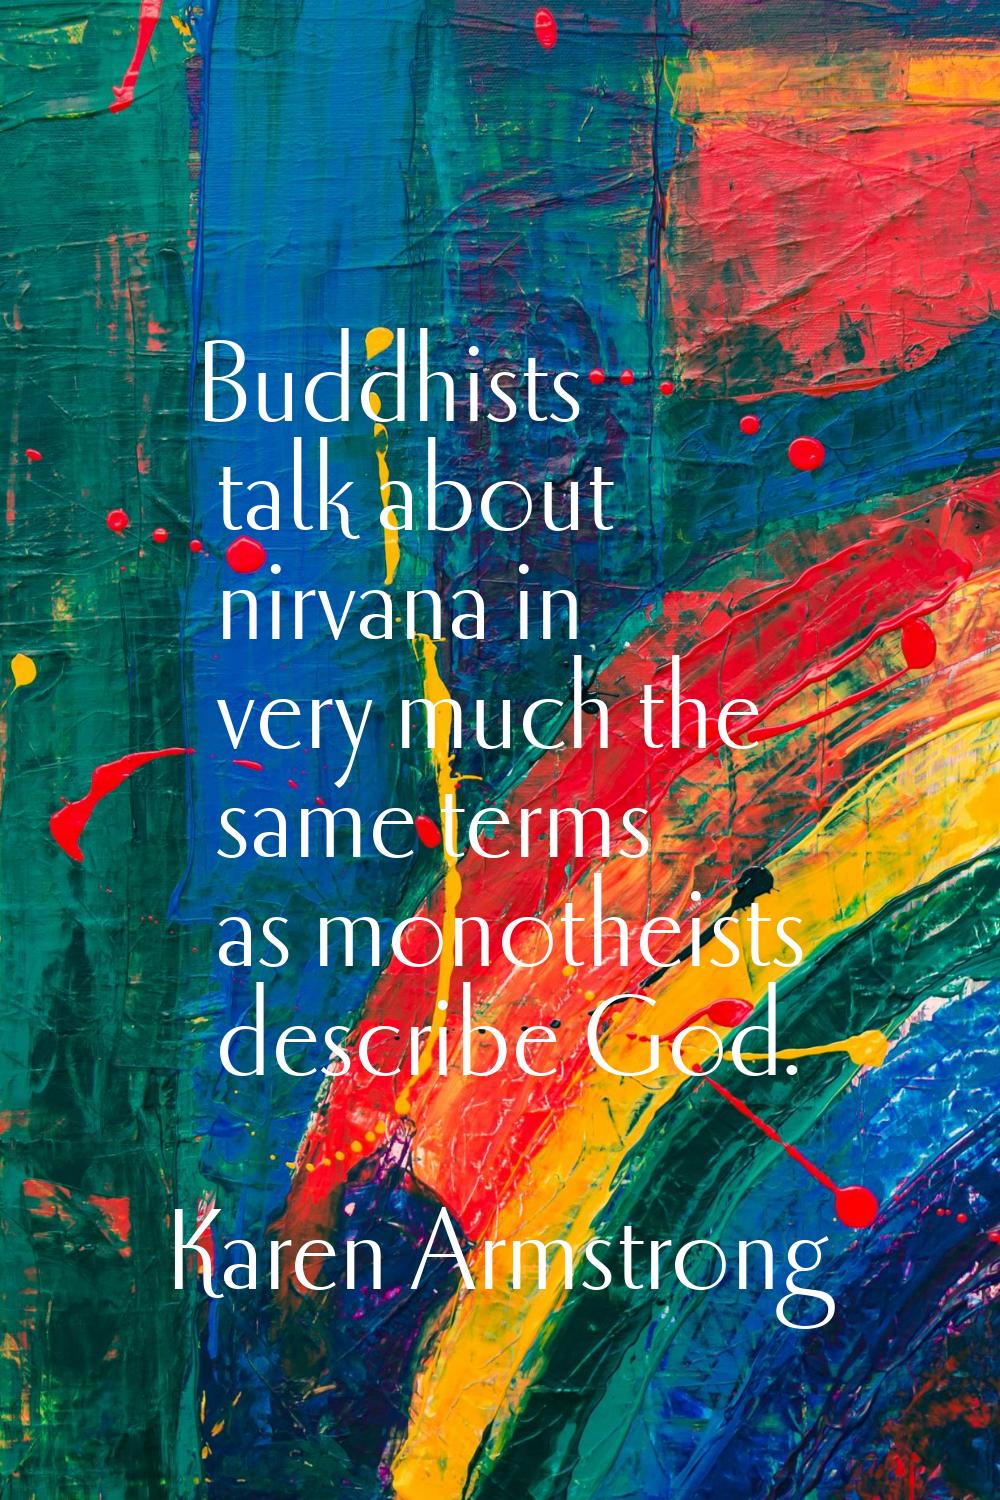 Buddhists talk about nirvana in very much the same terms as monotheists describe God.